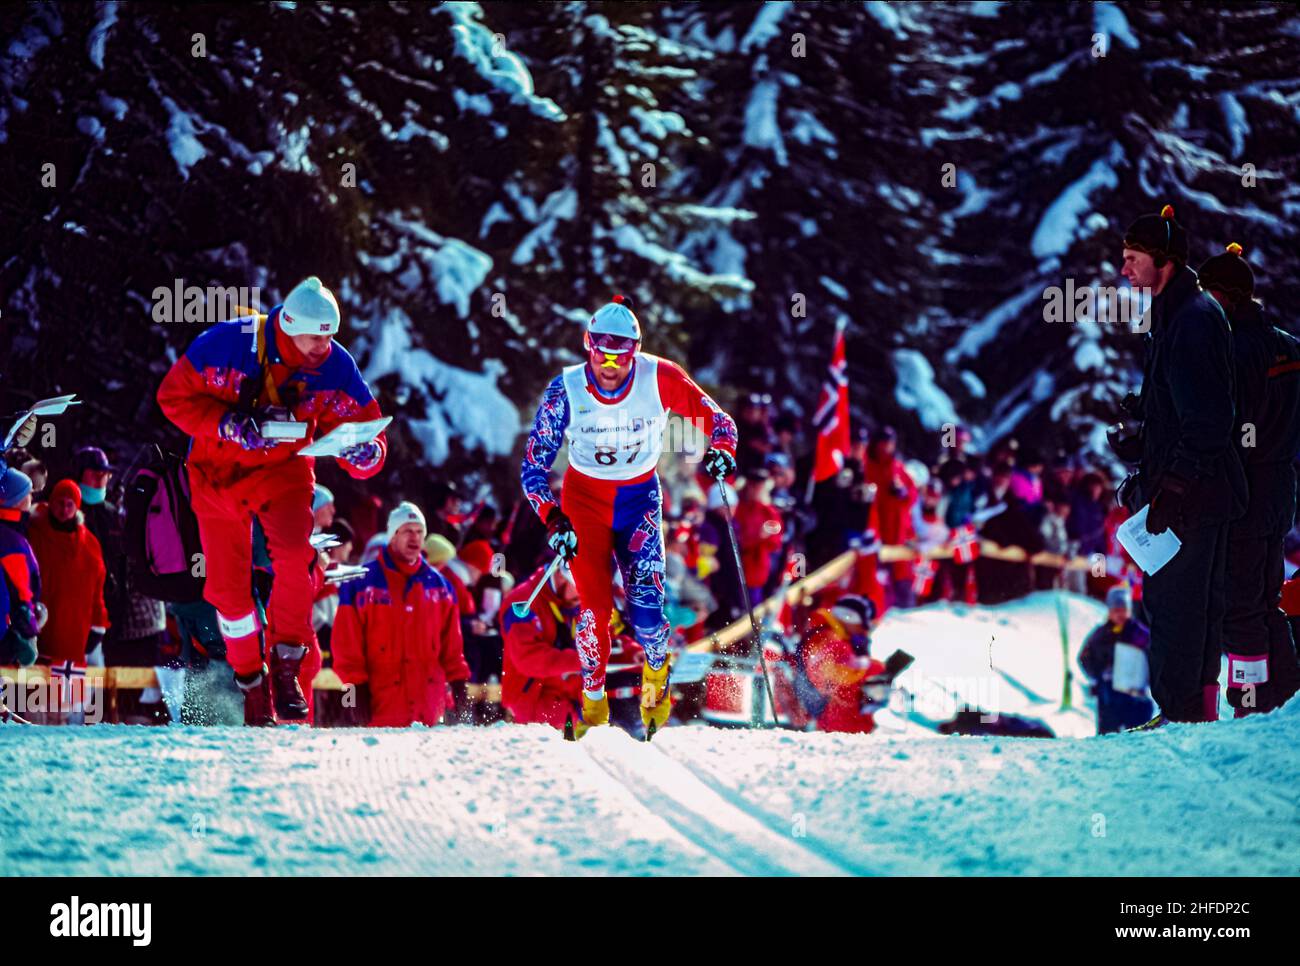 Vegard Ulvang (NOR) wins the gold medal in the men's 10km cross country skiing at the 1994 Olympic Winter Games. Stock Photo